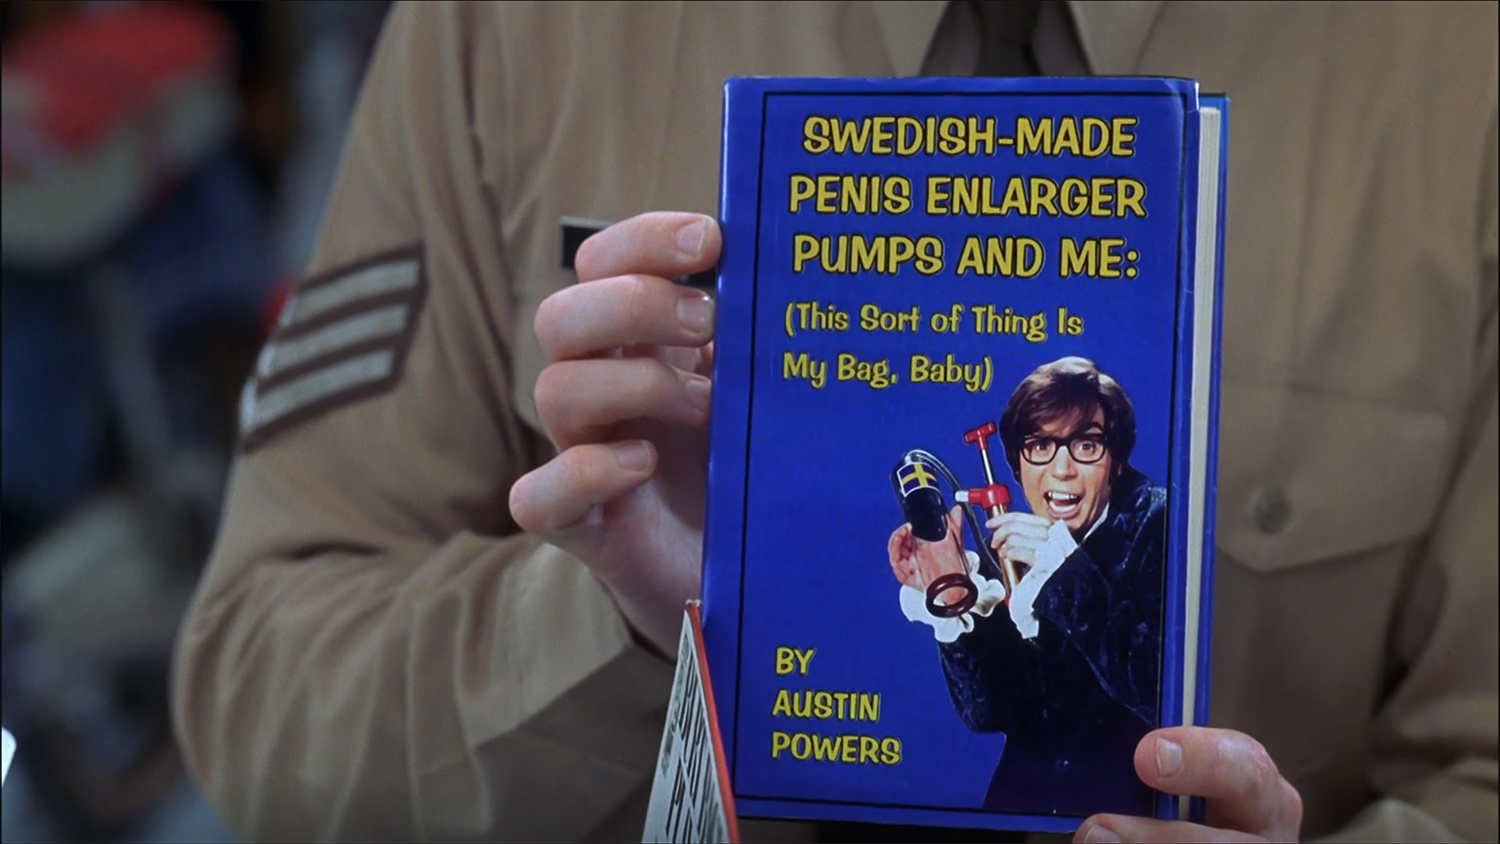 A Swedish-Made Penis Enlarger Pumps and Me: (This Sort of Thing Is My Bag, Baby)